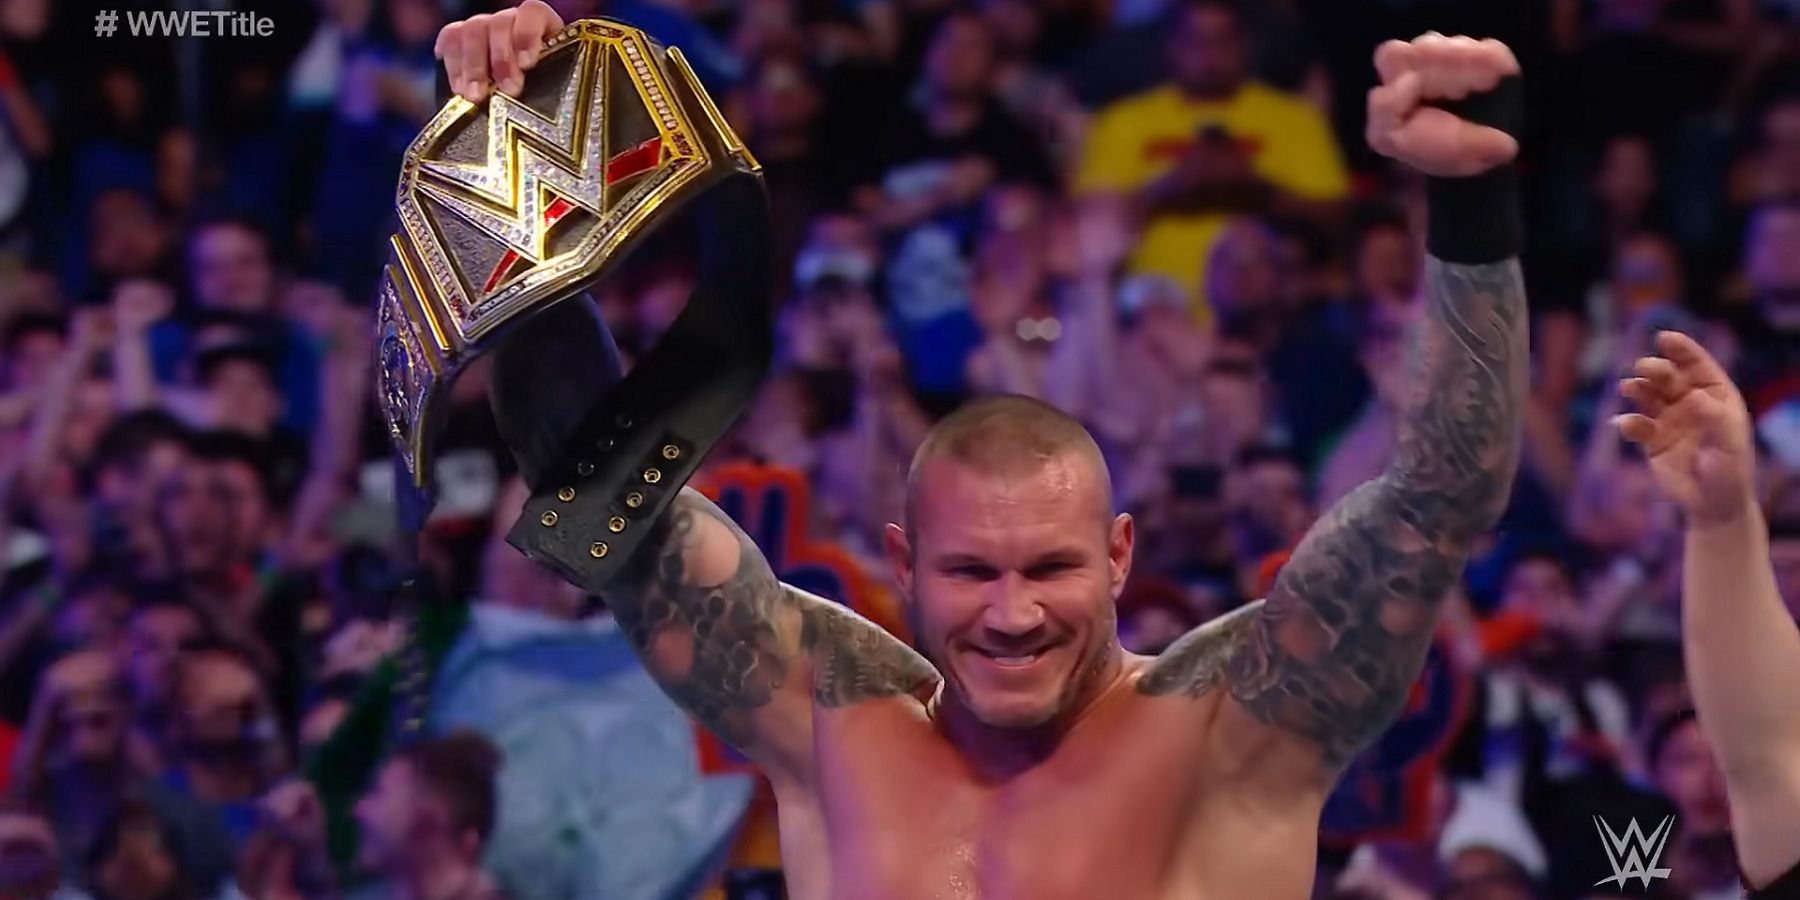 The Uncertain Future: Randy Orton's Wrestling Career Hanging in the Balance